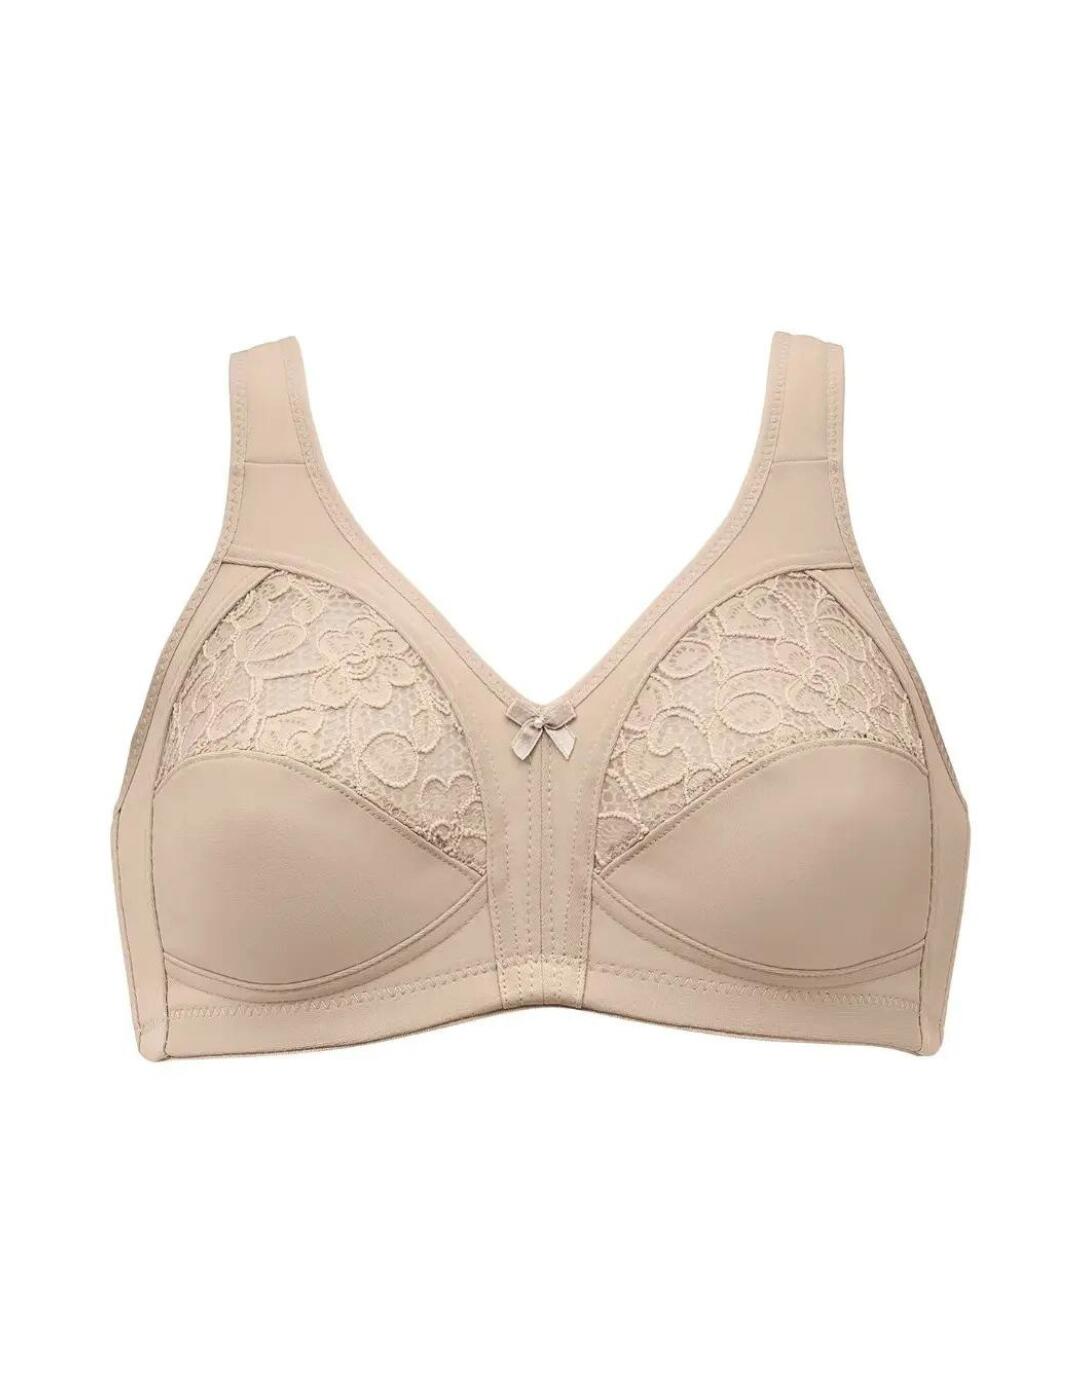 Naturana Wireless Cotton and Lace Full Cup Bra with Comfort Straps 5236